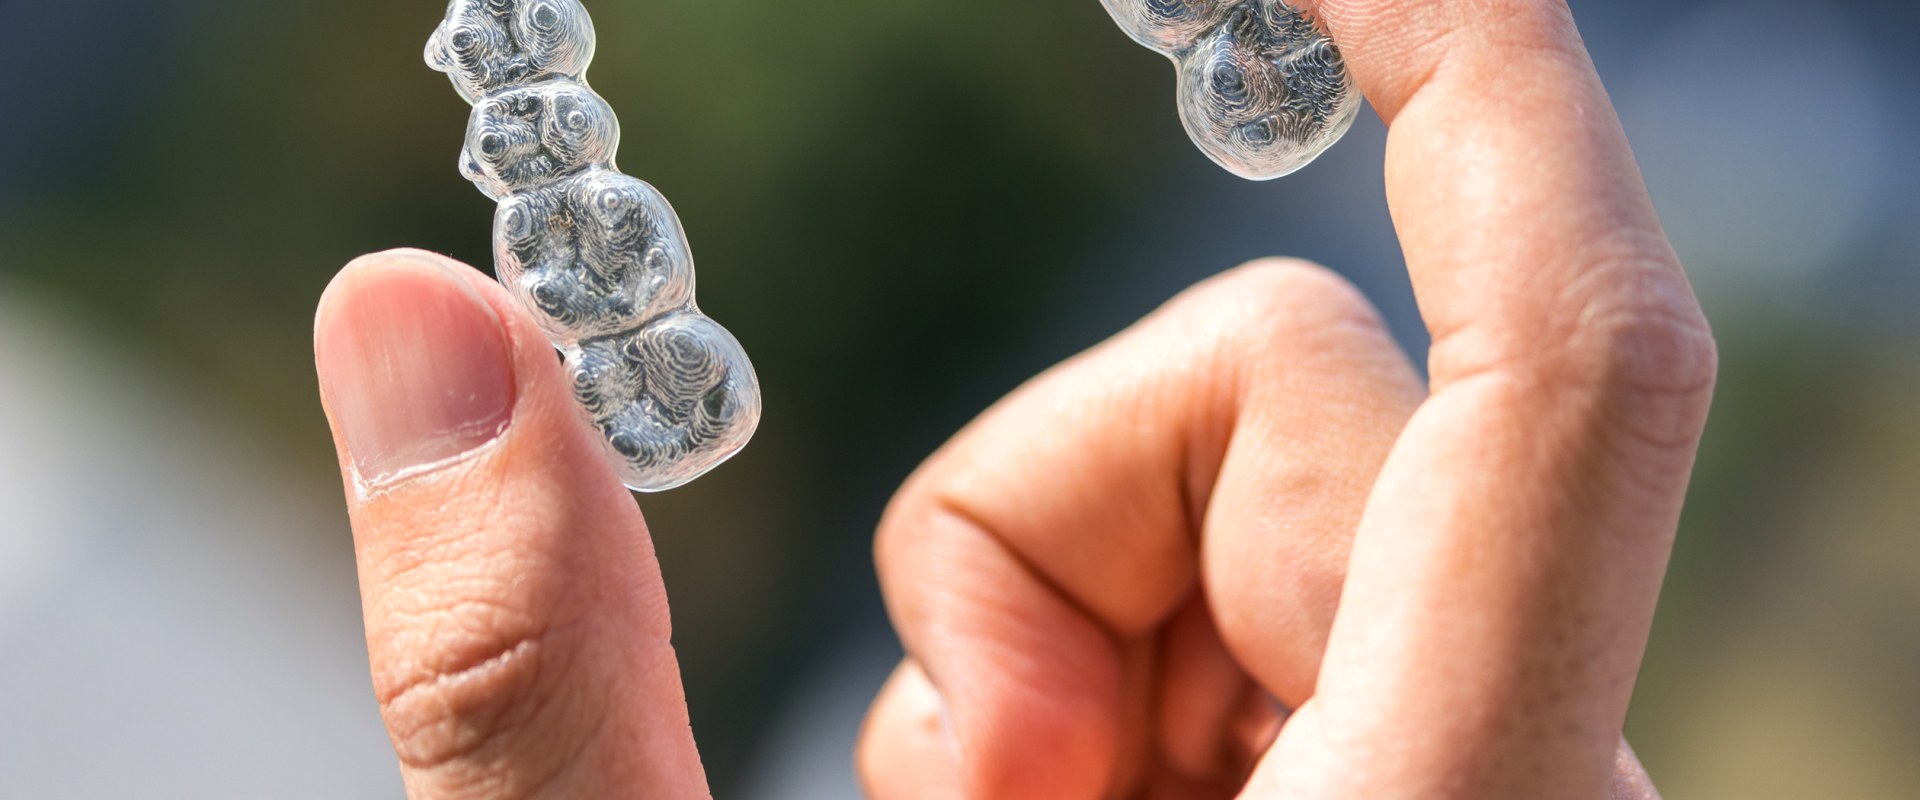 Do orthodontists make money with Invisalign?